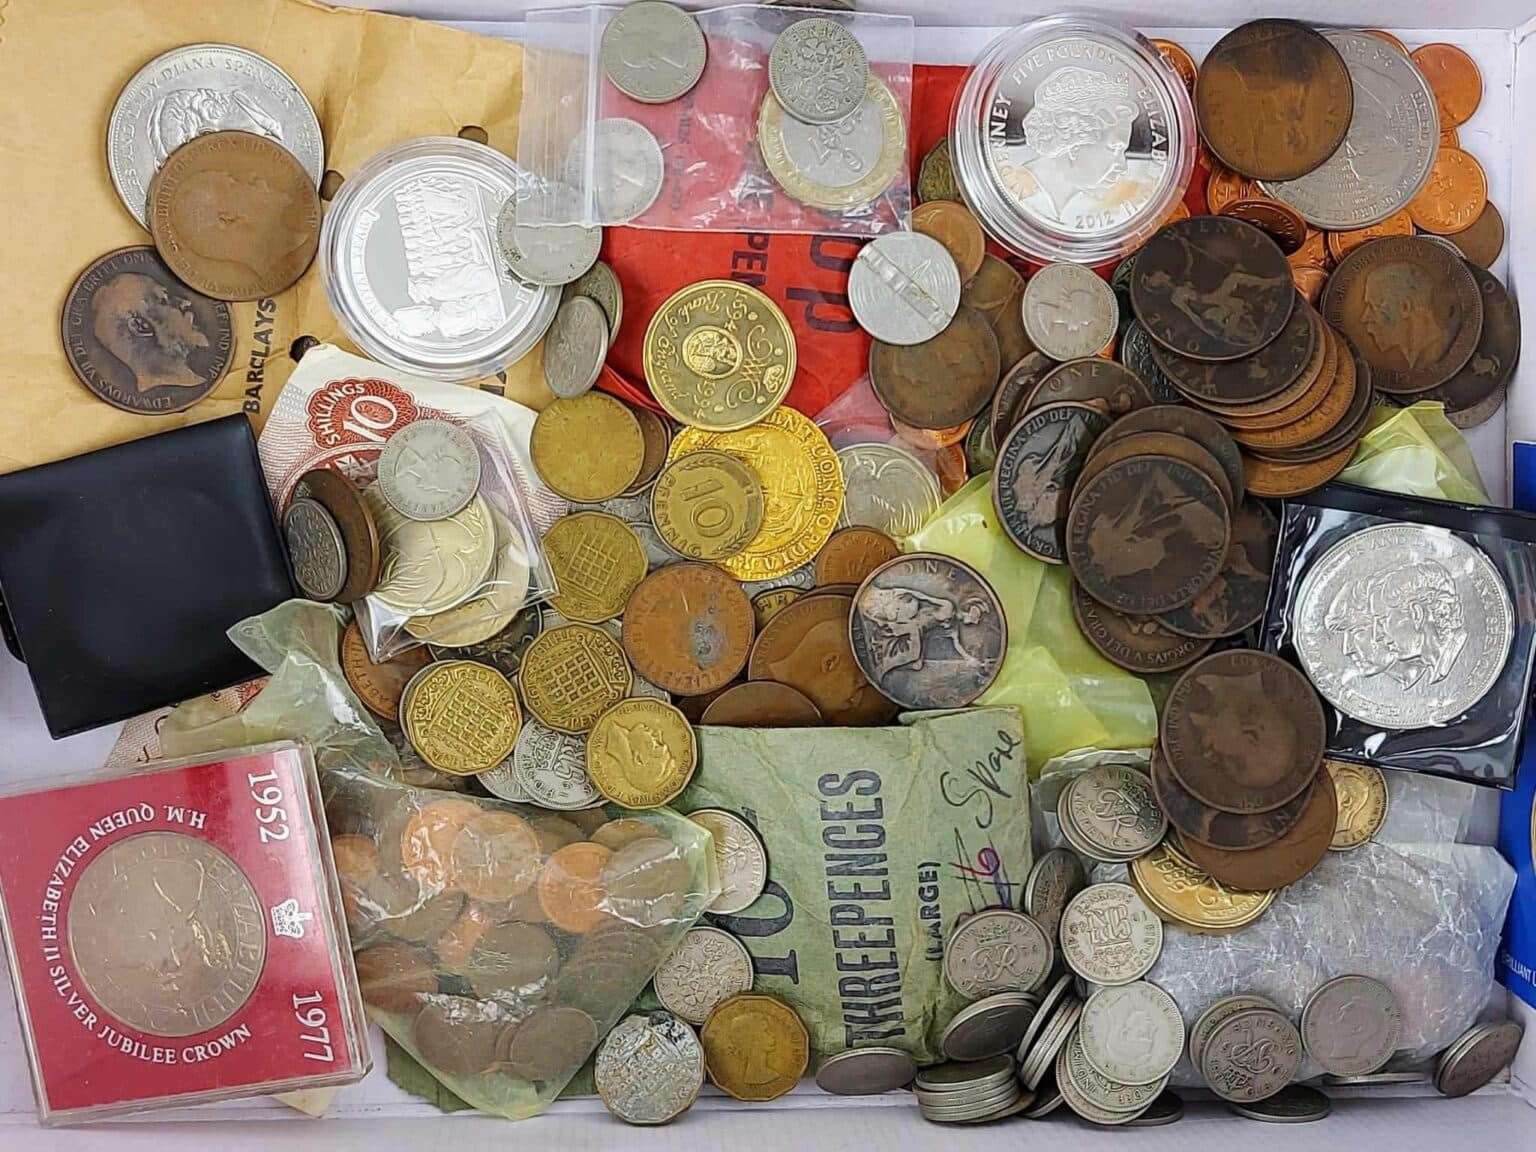 The Charles I gold coin was spotted among this collection of old coins and banknotes. Picture: Hansons Auctioneers